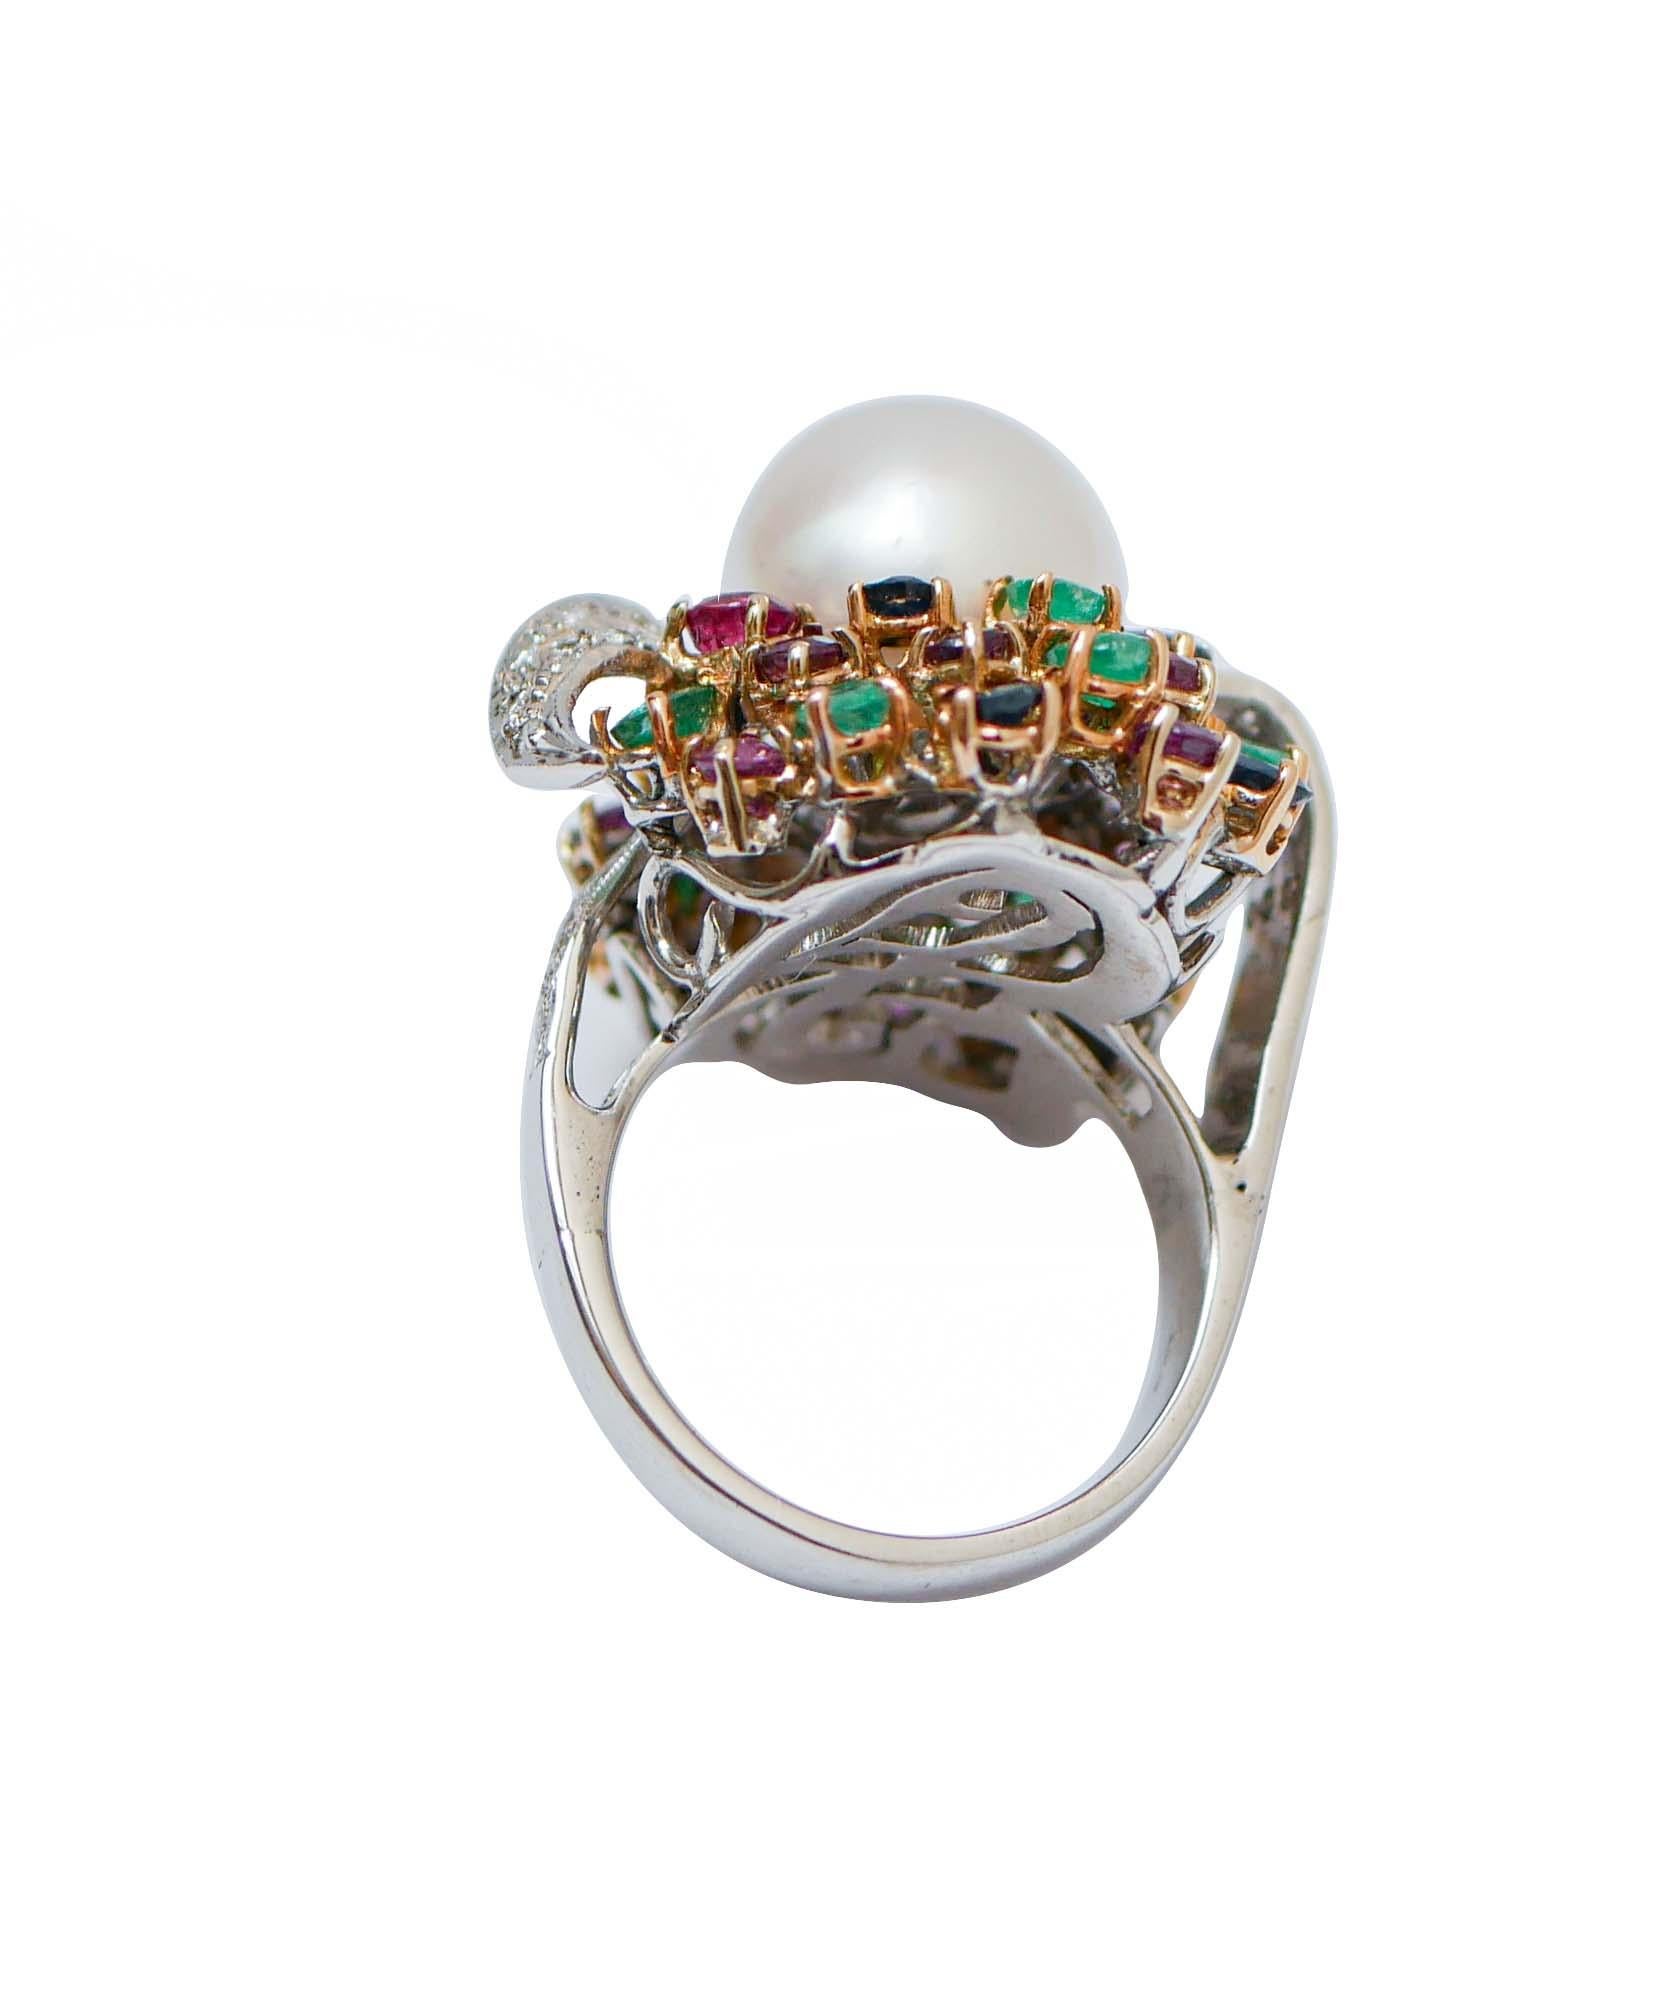 Retro South-Sea Pearls, Emeralds, Rubies, Sapphires, Diamonds, 14 Kt White Gold Ring. For Sale